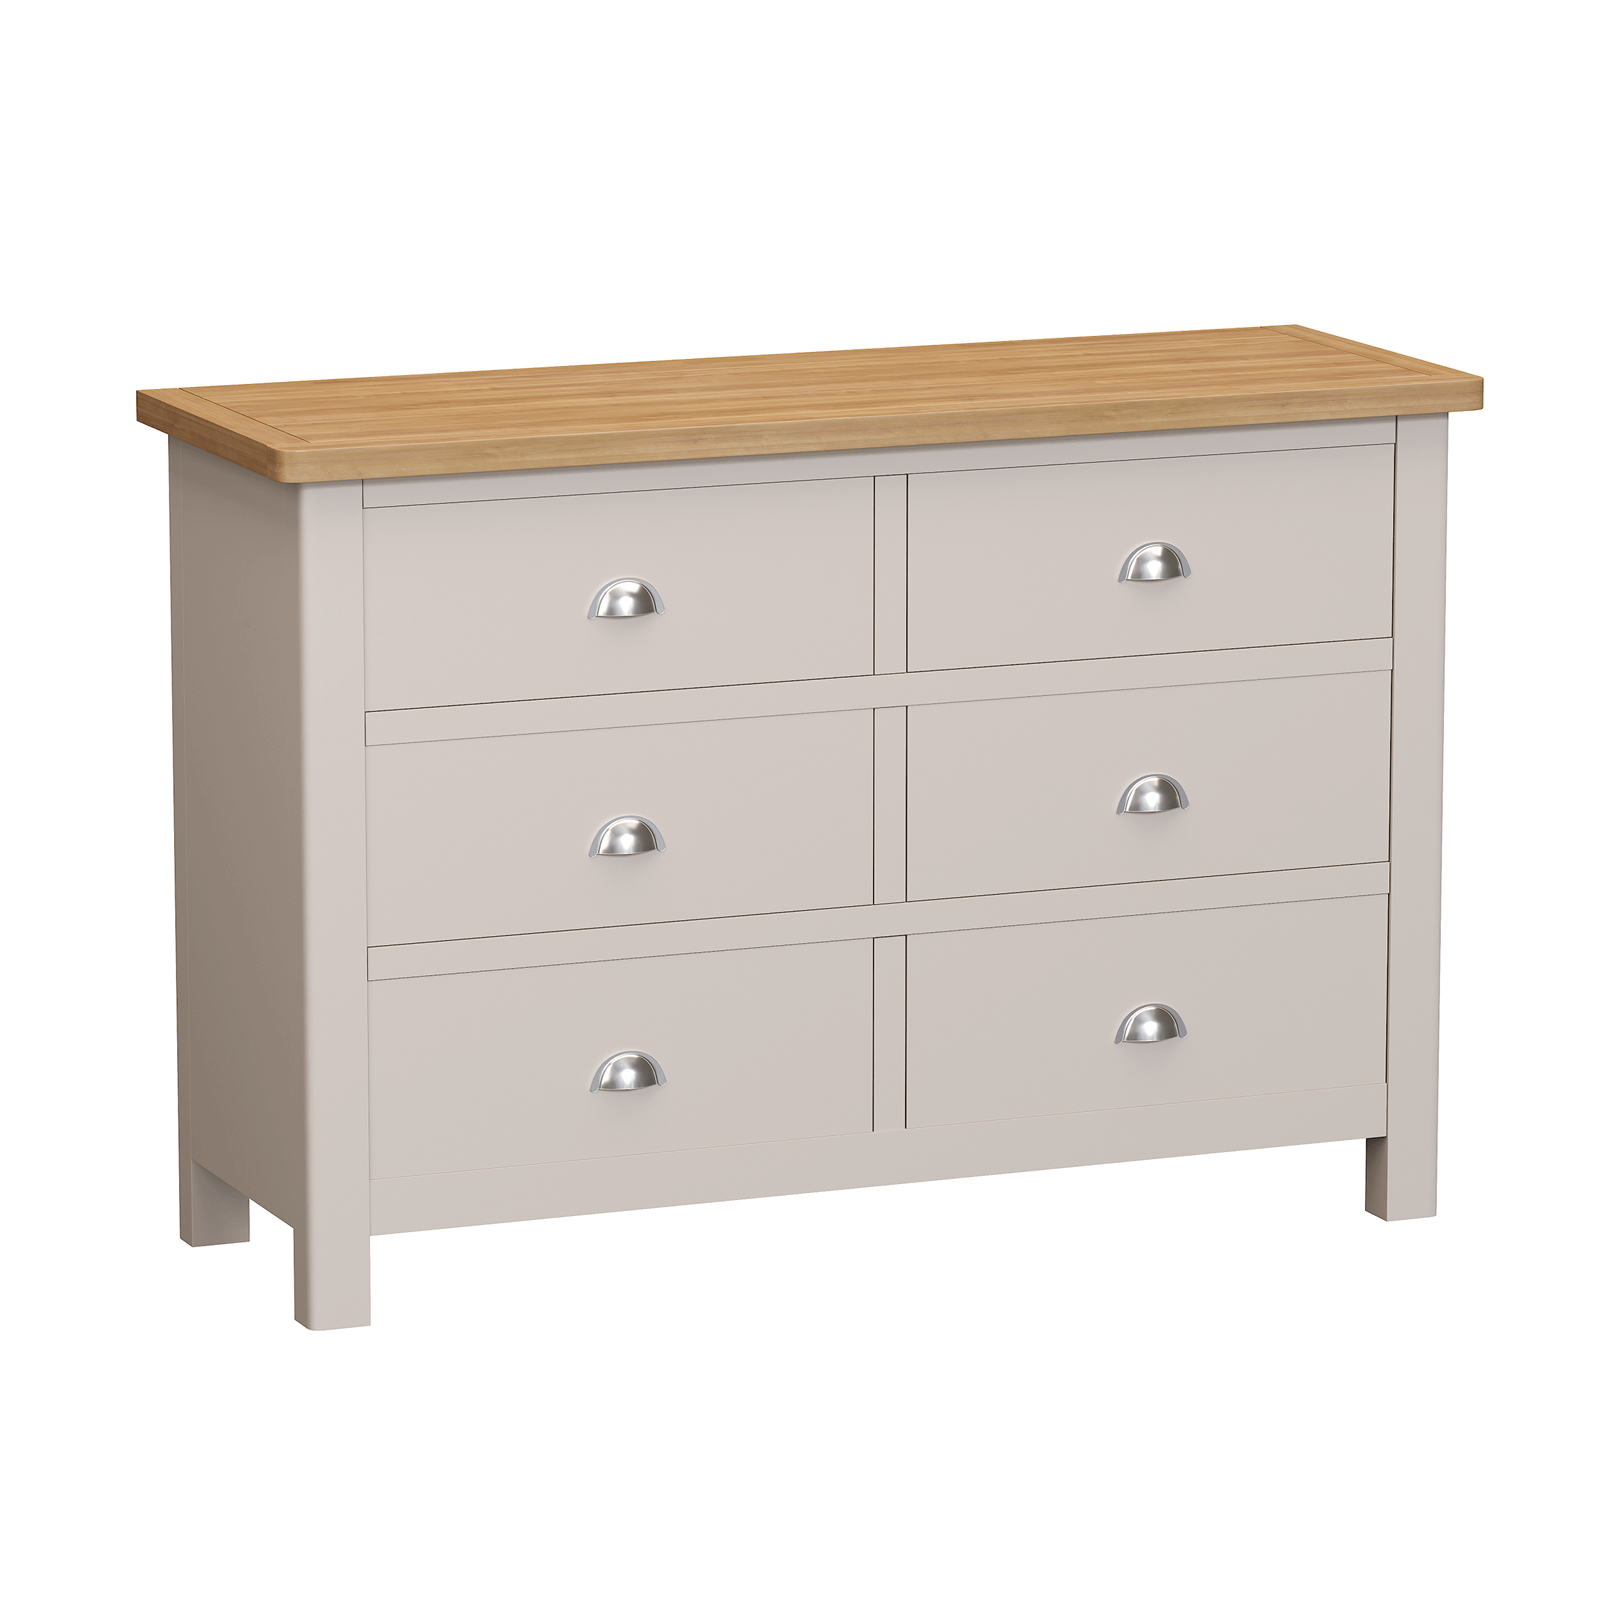 Padstow 6 Drawer Chest of Drawers - Truffle